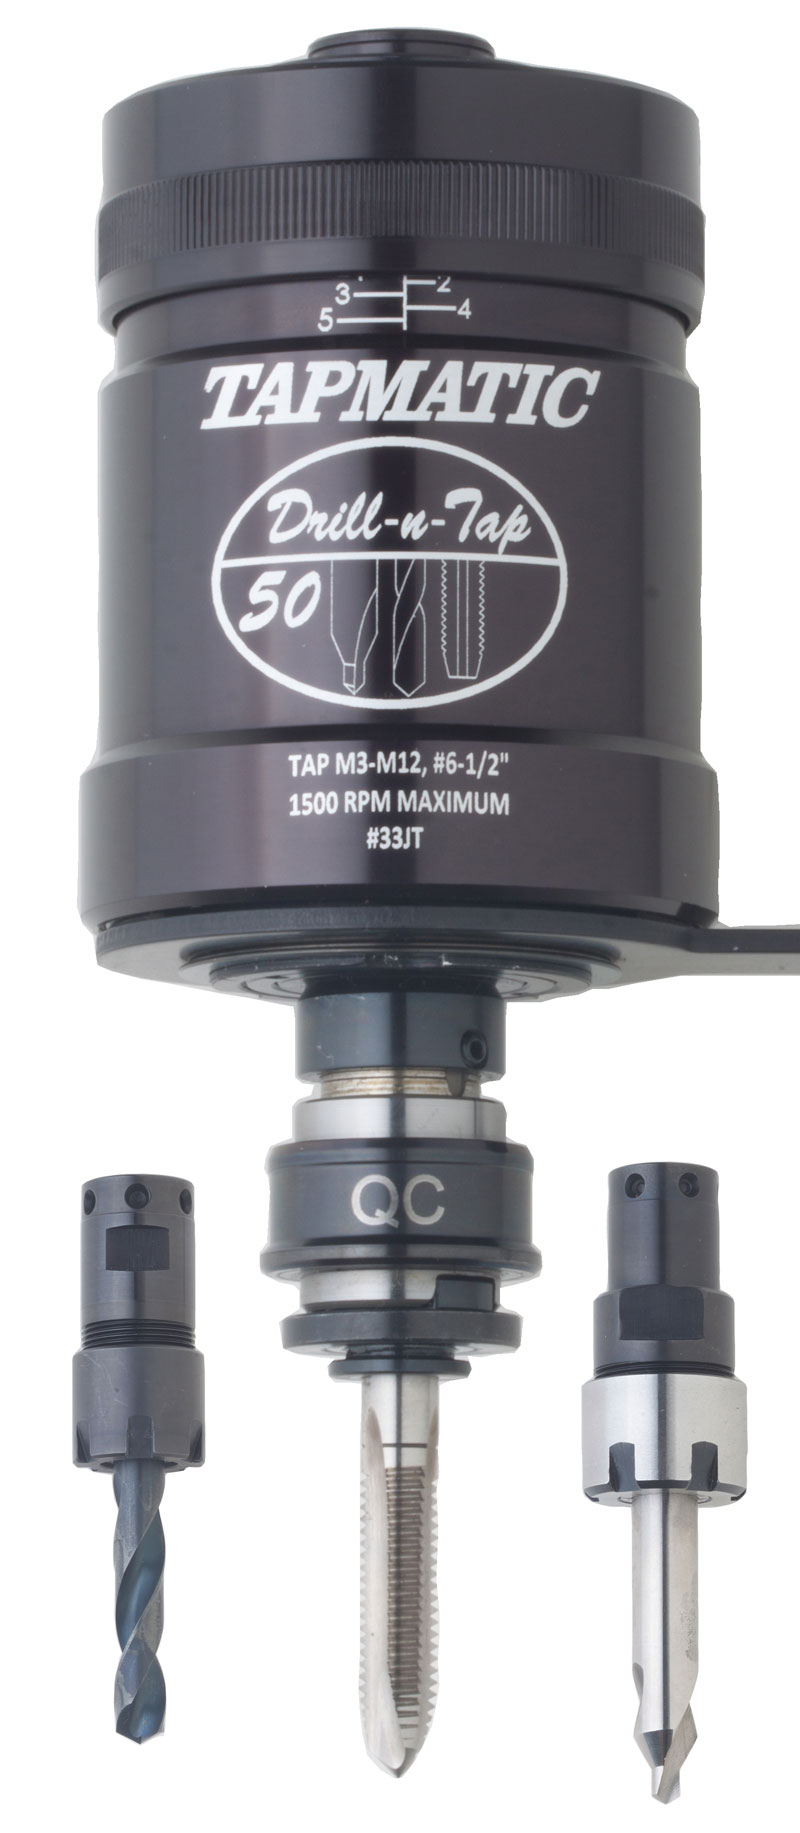 Drill-n-Tap 50 Self Reversing Tapping Heads for Tapping and Drilling